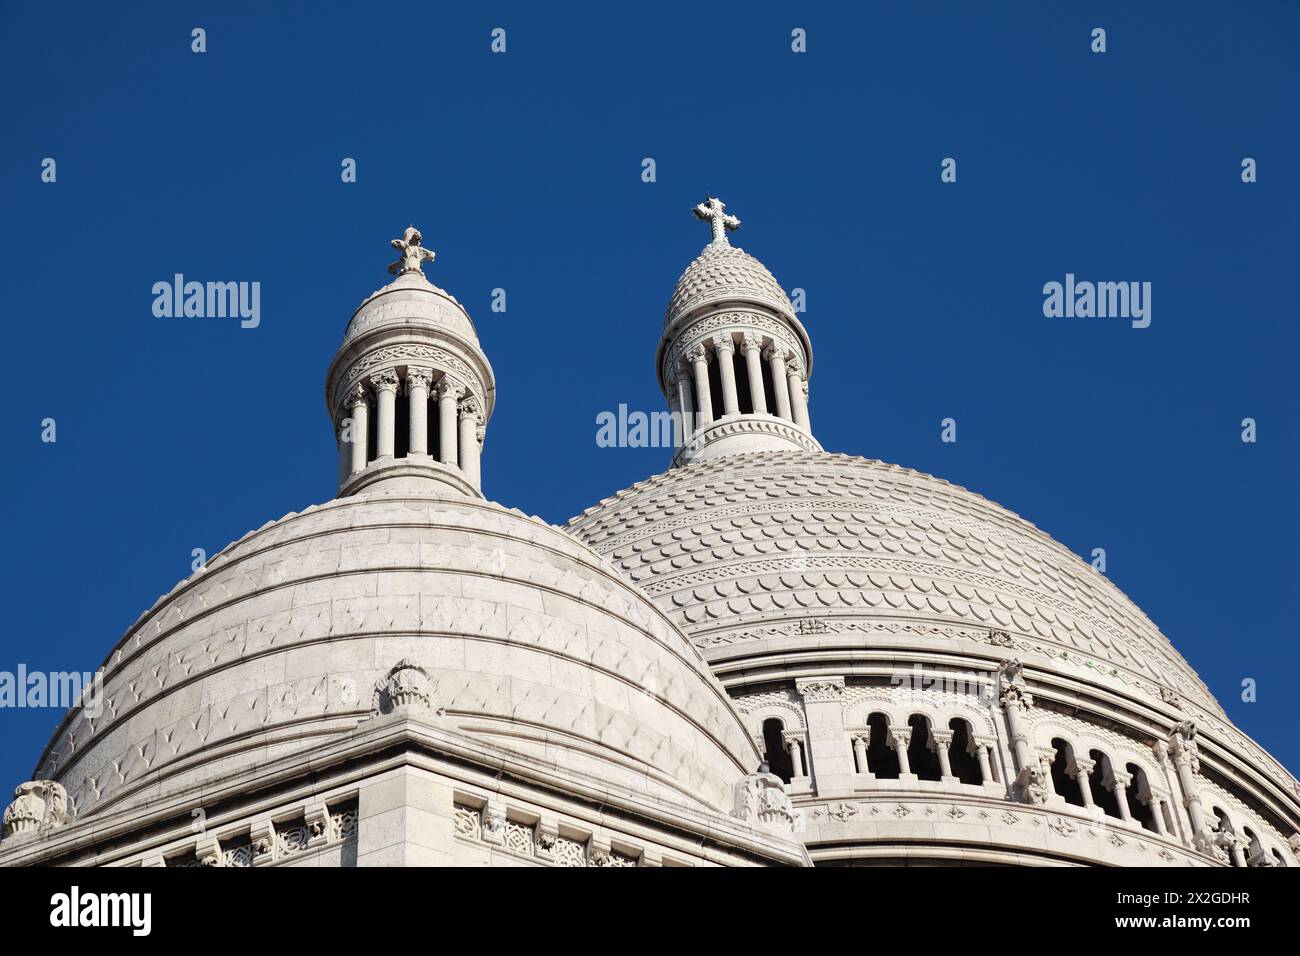 Two domes of Scare Coeur. One of most beautiful churches in Paris - Sacre Coeur (Church of Heart of Christ) Stock Photo